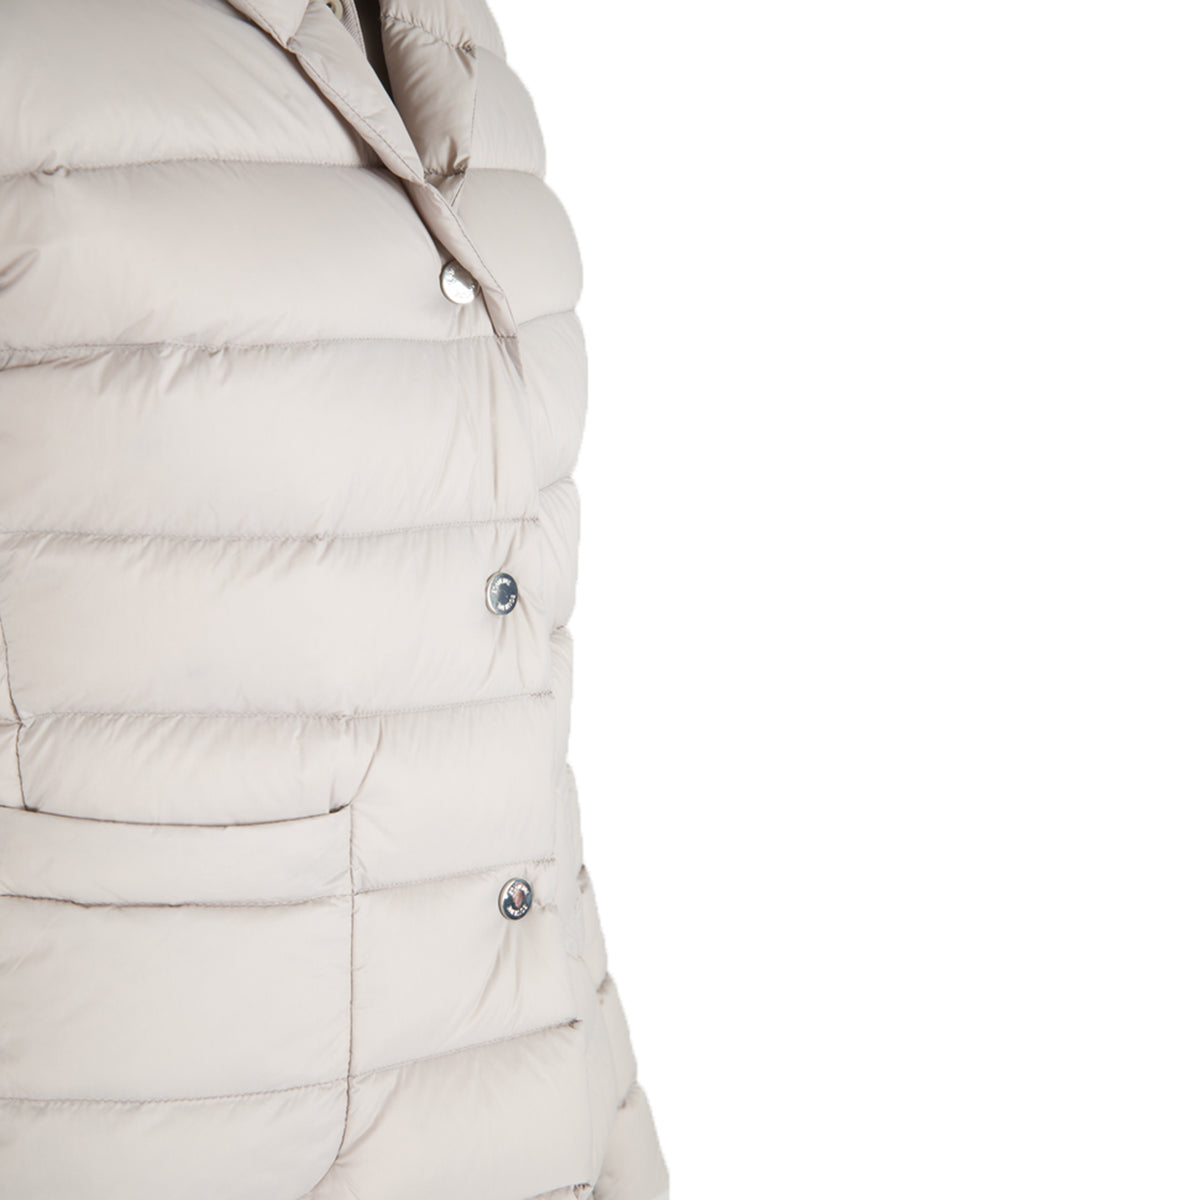 Equiline Women's Elsae Light Quilted Jacket